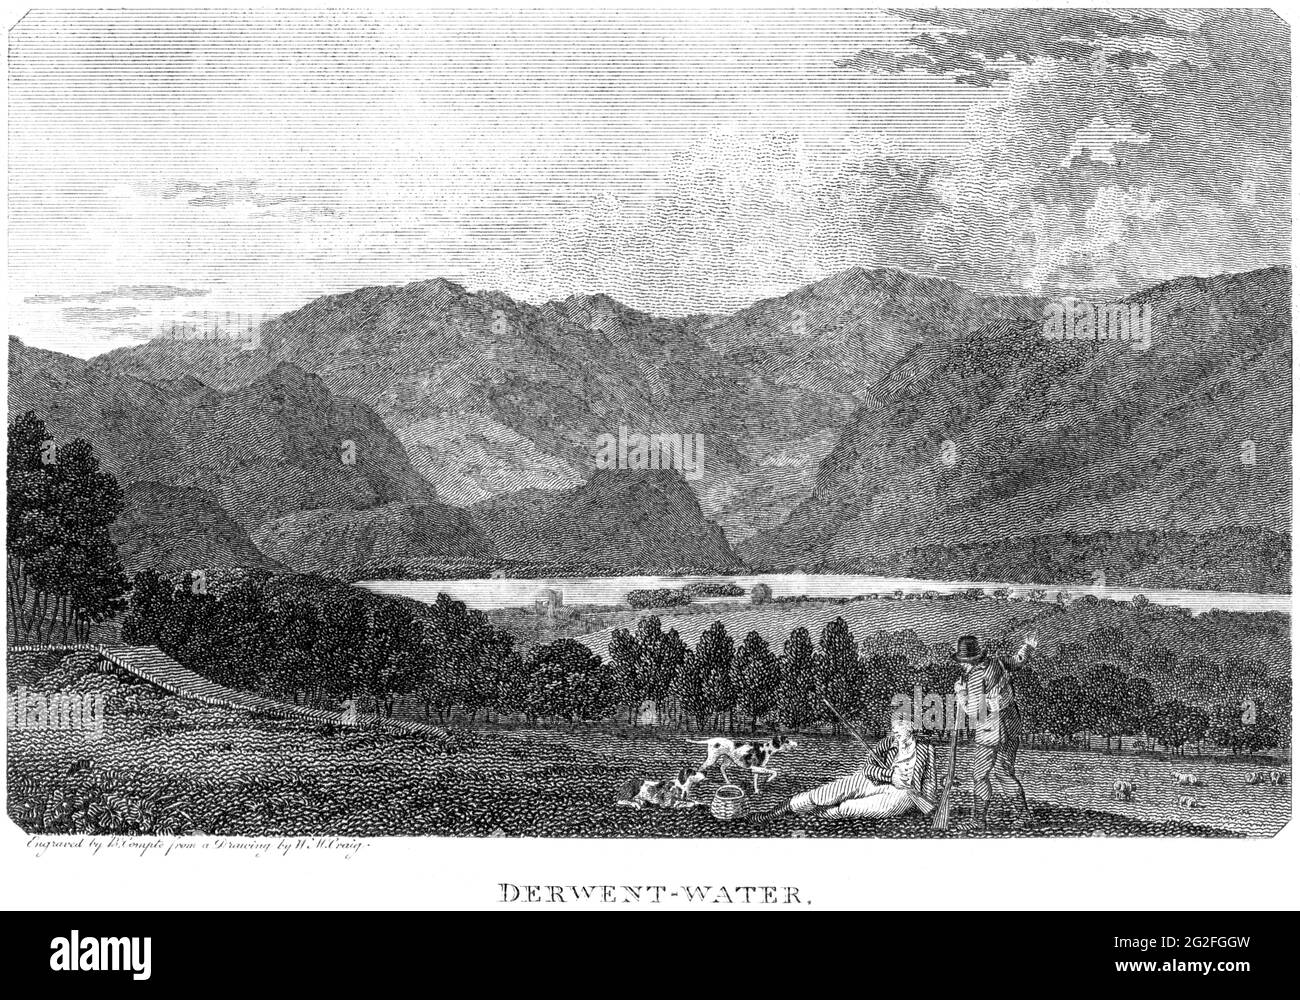 An engraving of Derwentwater, Cumberland scanned at high resolution from a book printed in 1812. Believed copyright free. Stock Photo